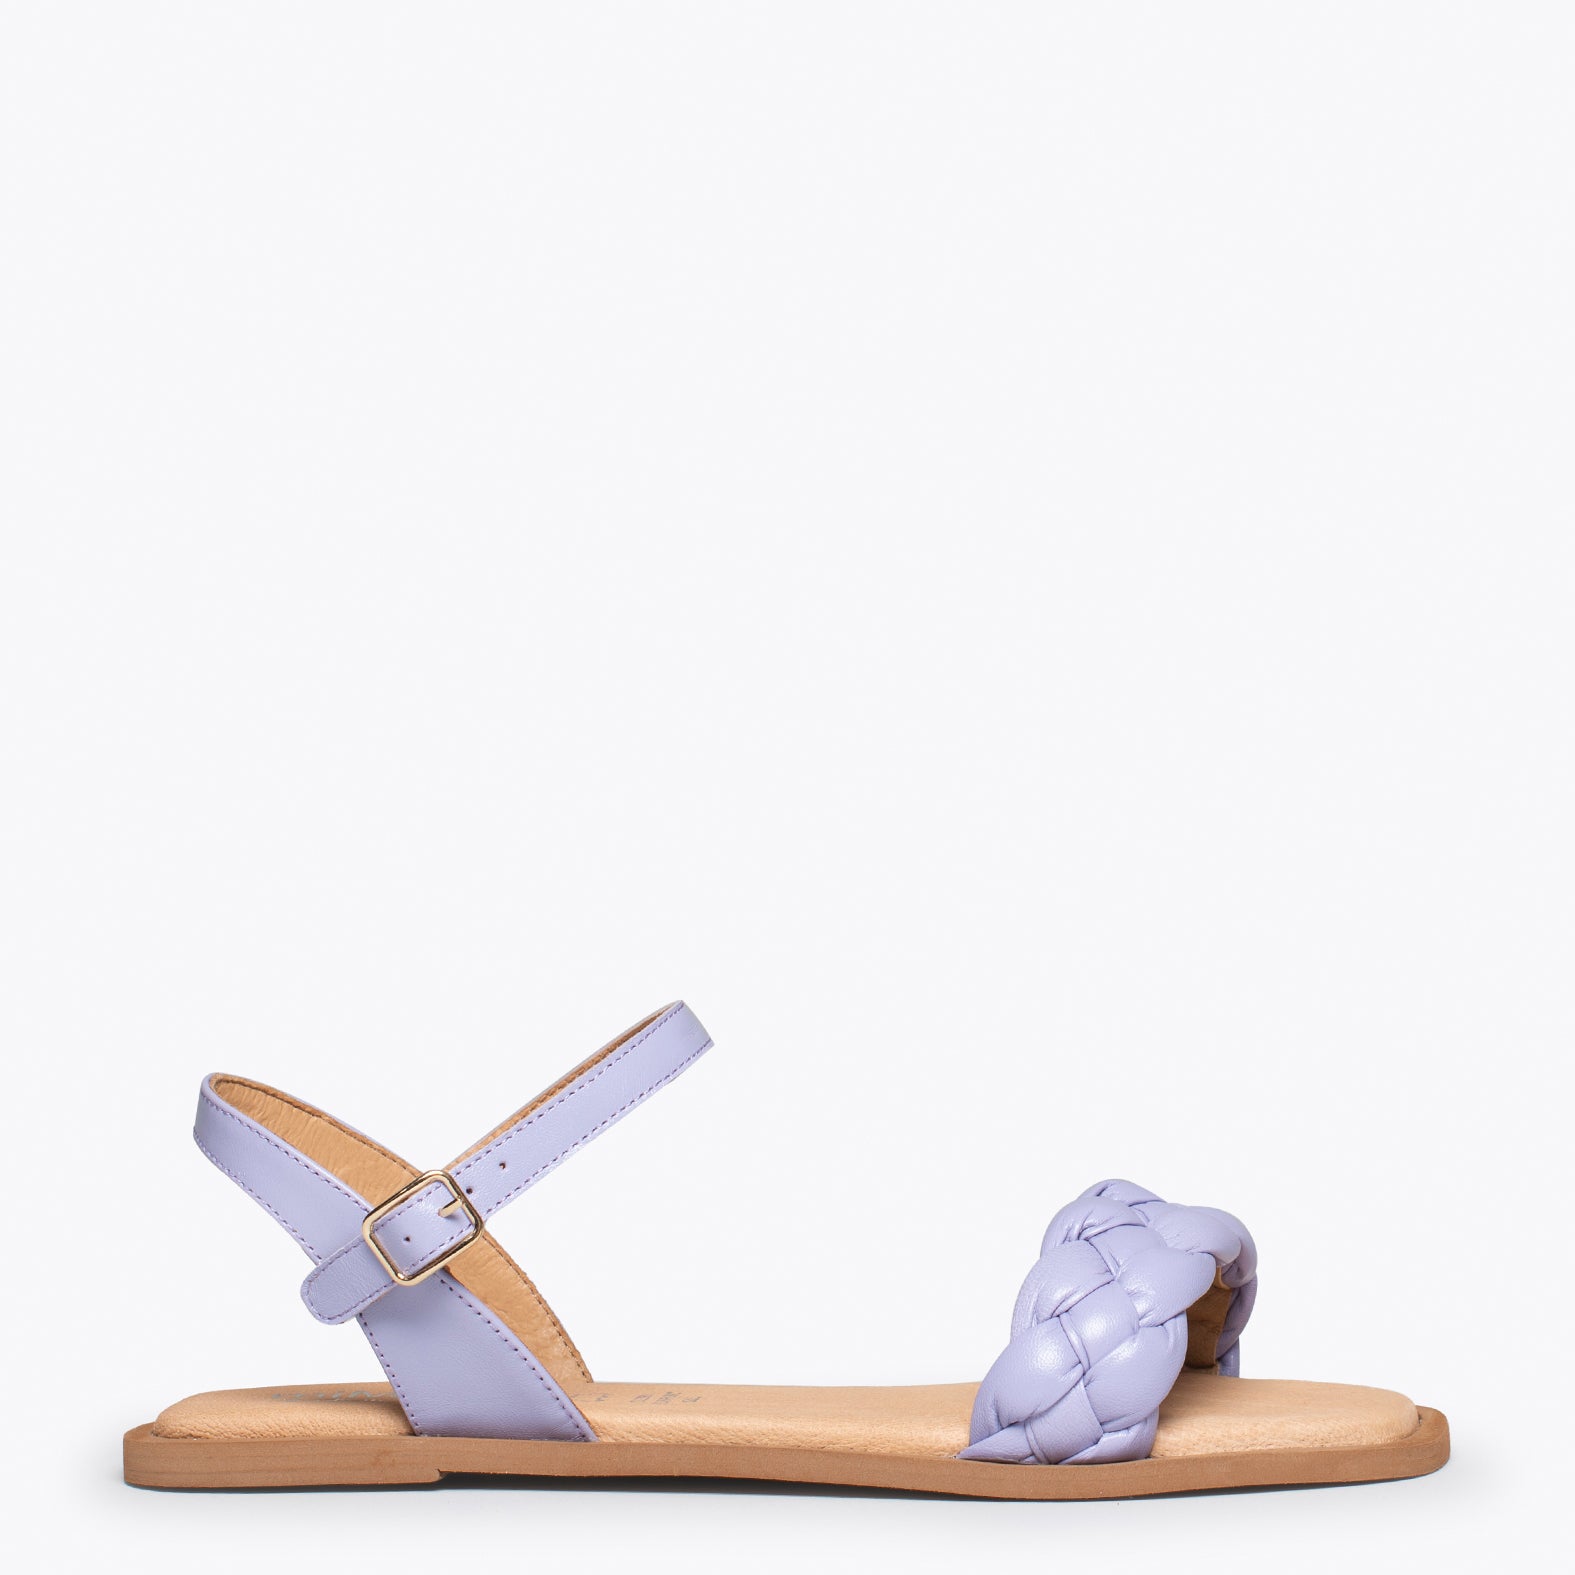 MARBELLA – LILAC flat sandals with braided strap